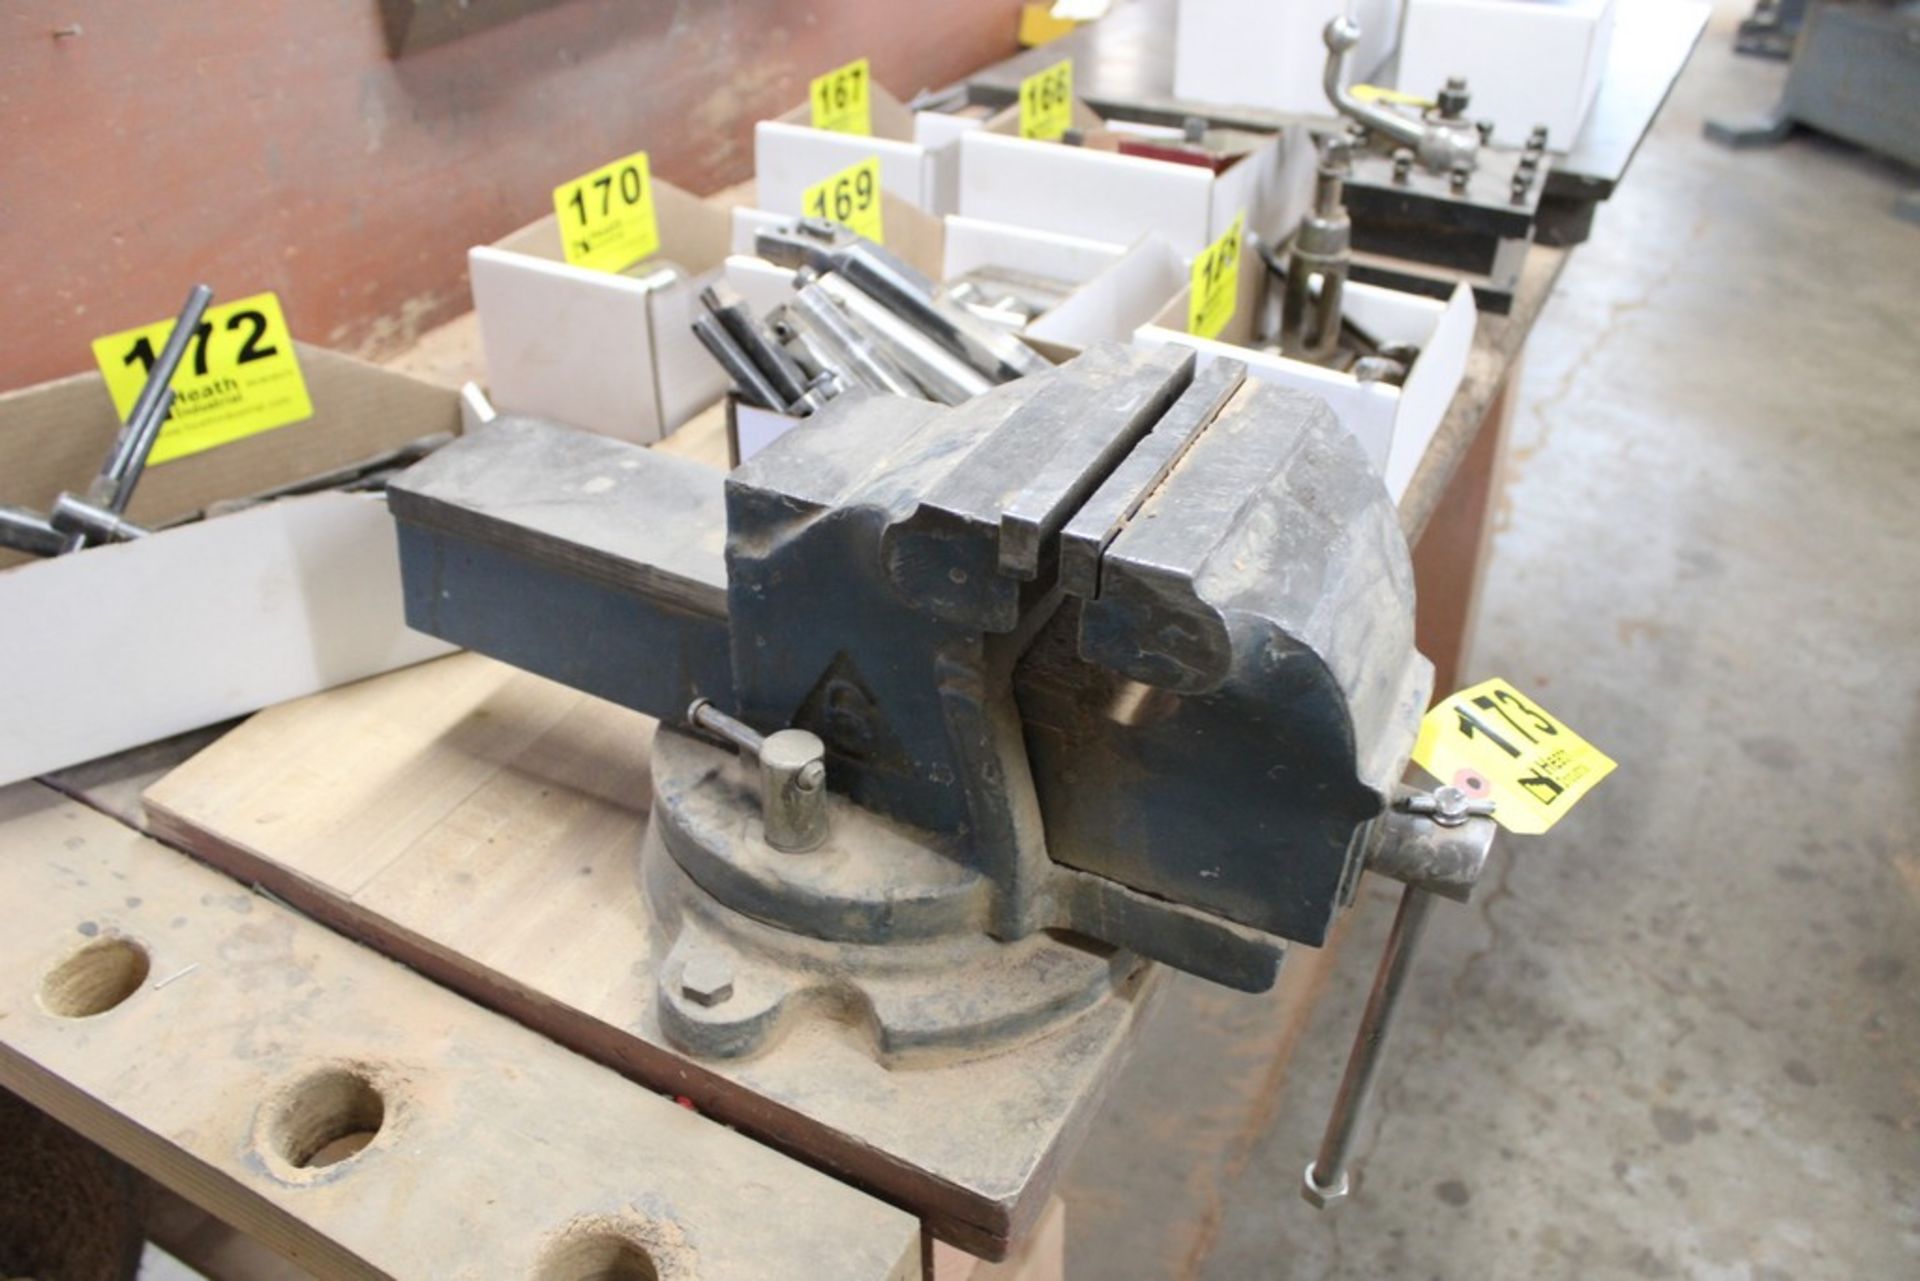 6" SWIVEL BASE BENCH TOP VISE WITH HEAVY DUTY WORK BENCH 72" X 30" X 35" - Image 2 of 3